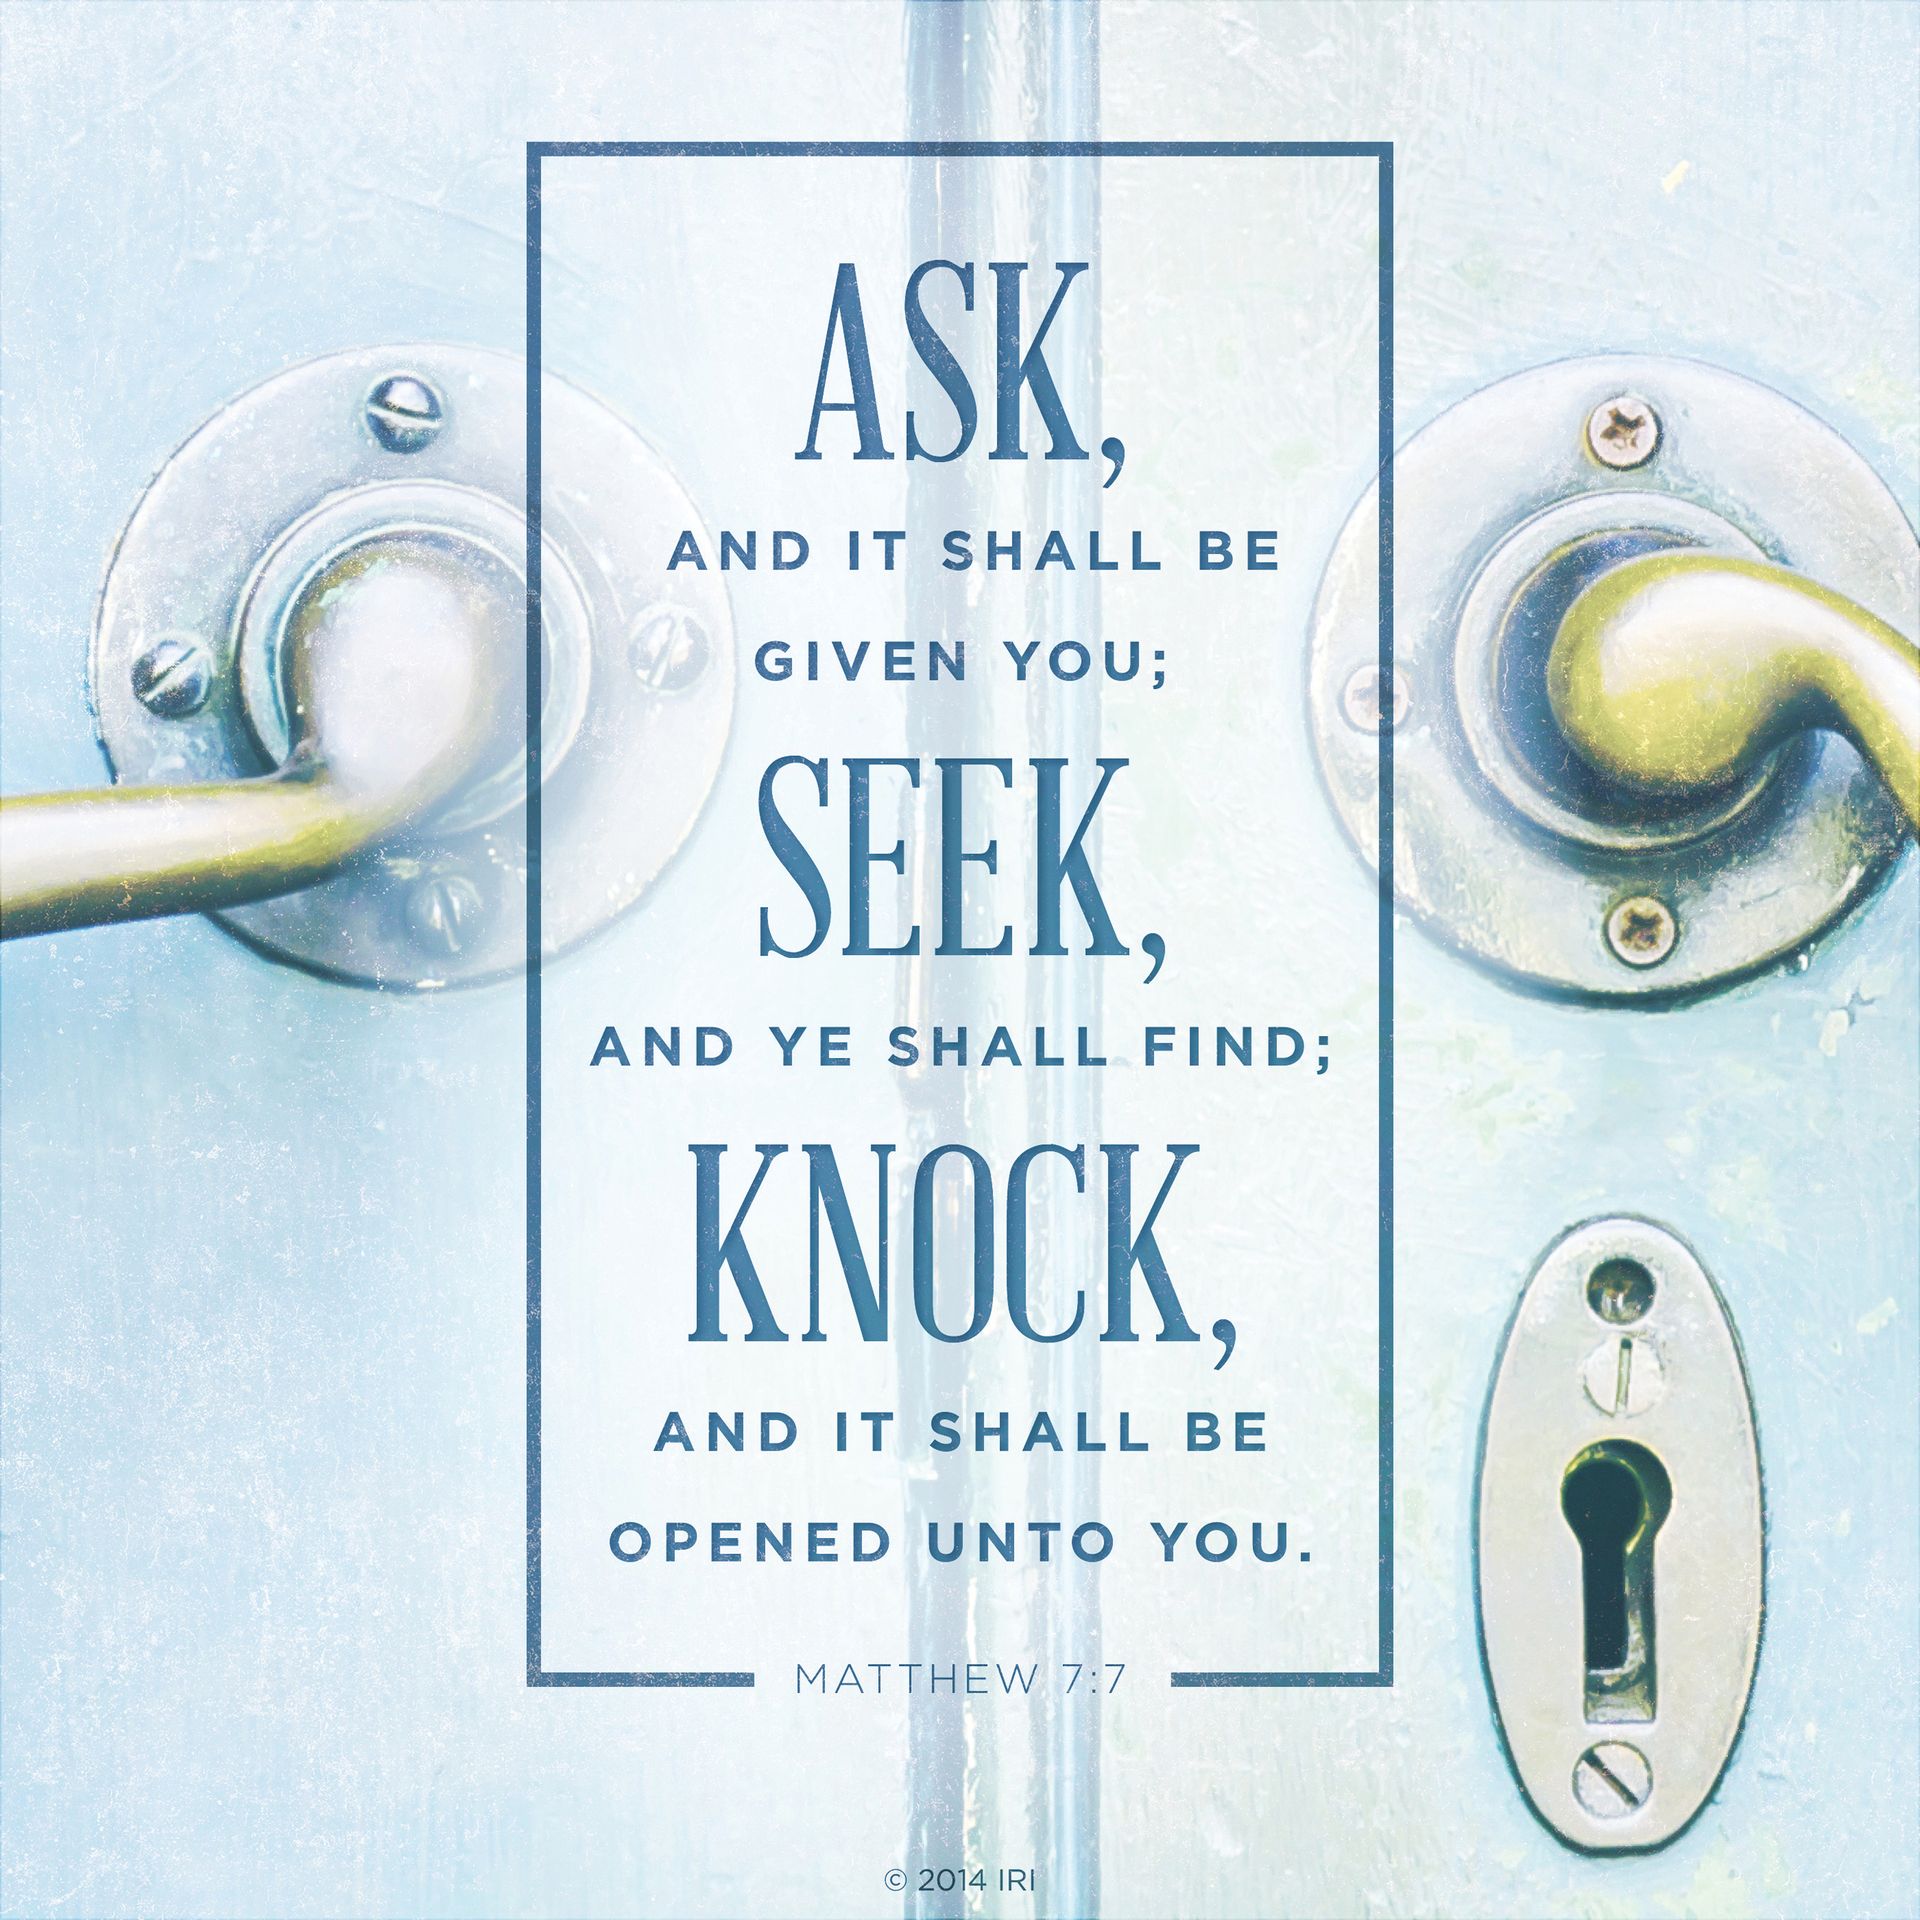 “Ask, and it shall be given you; seek, and ye shall find; knock, and it shall be opened unto you.”—Matthew 7:7